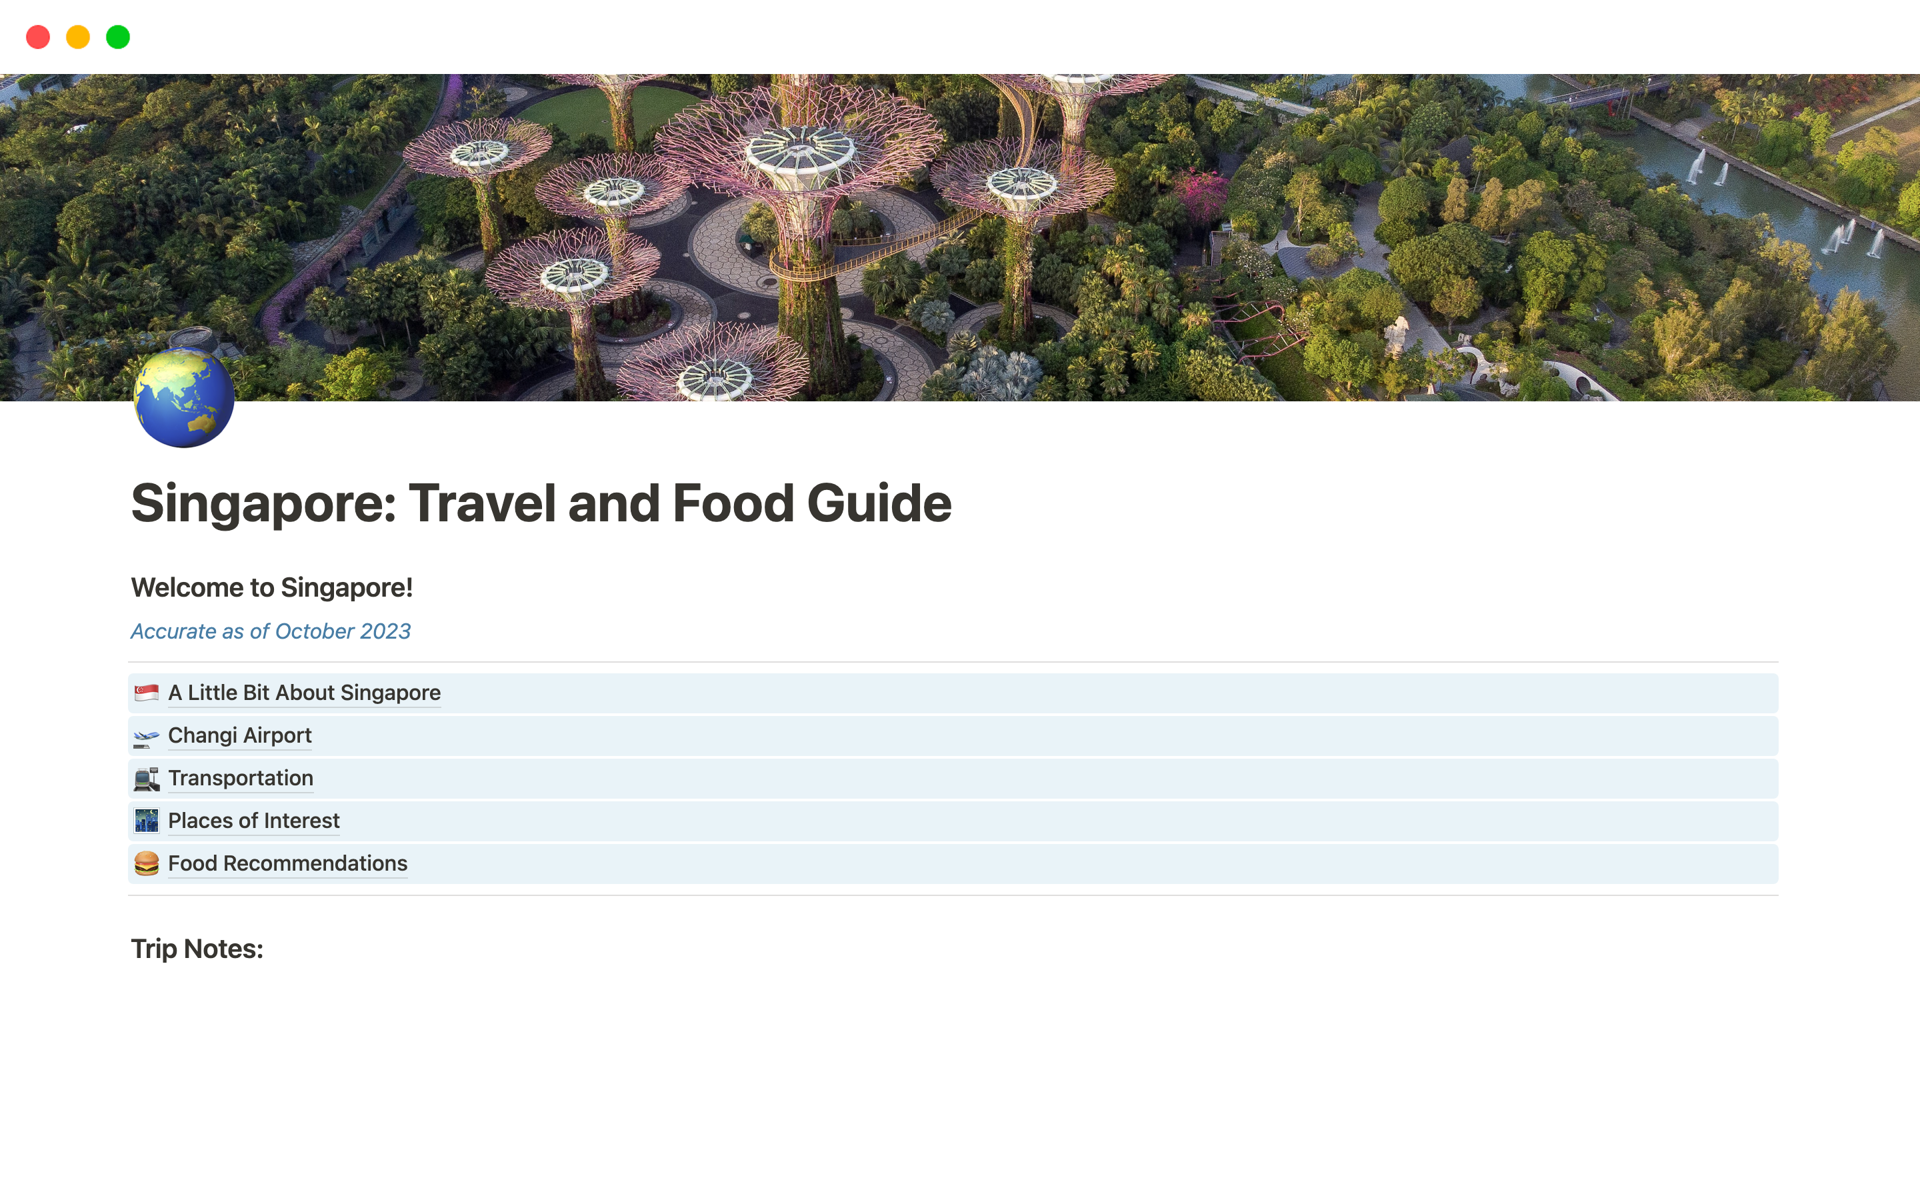 All-in-One Travel and Food Guide for Singapore